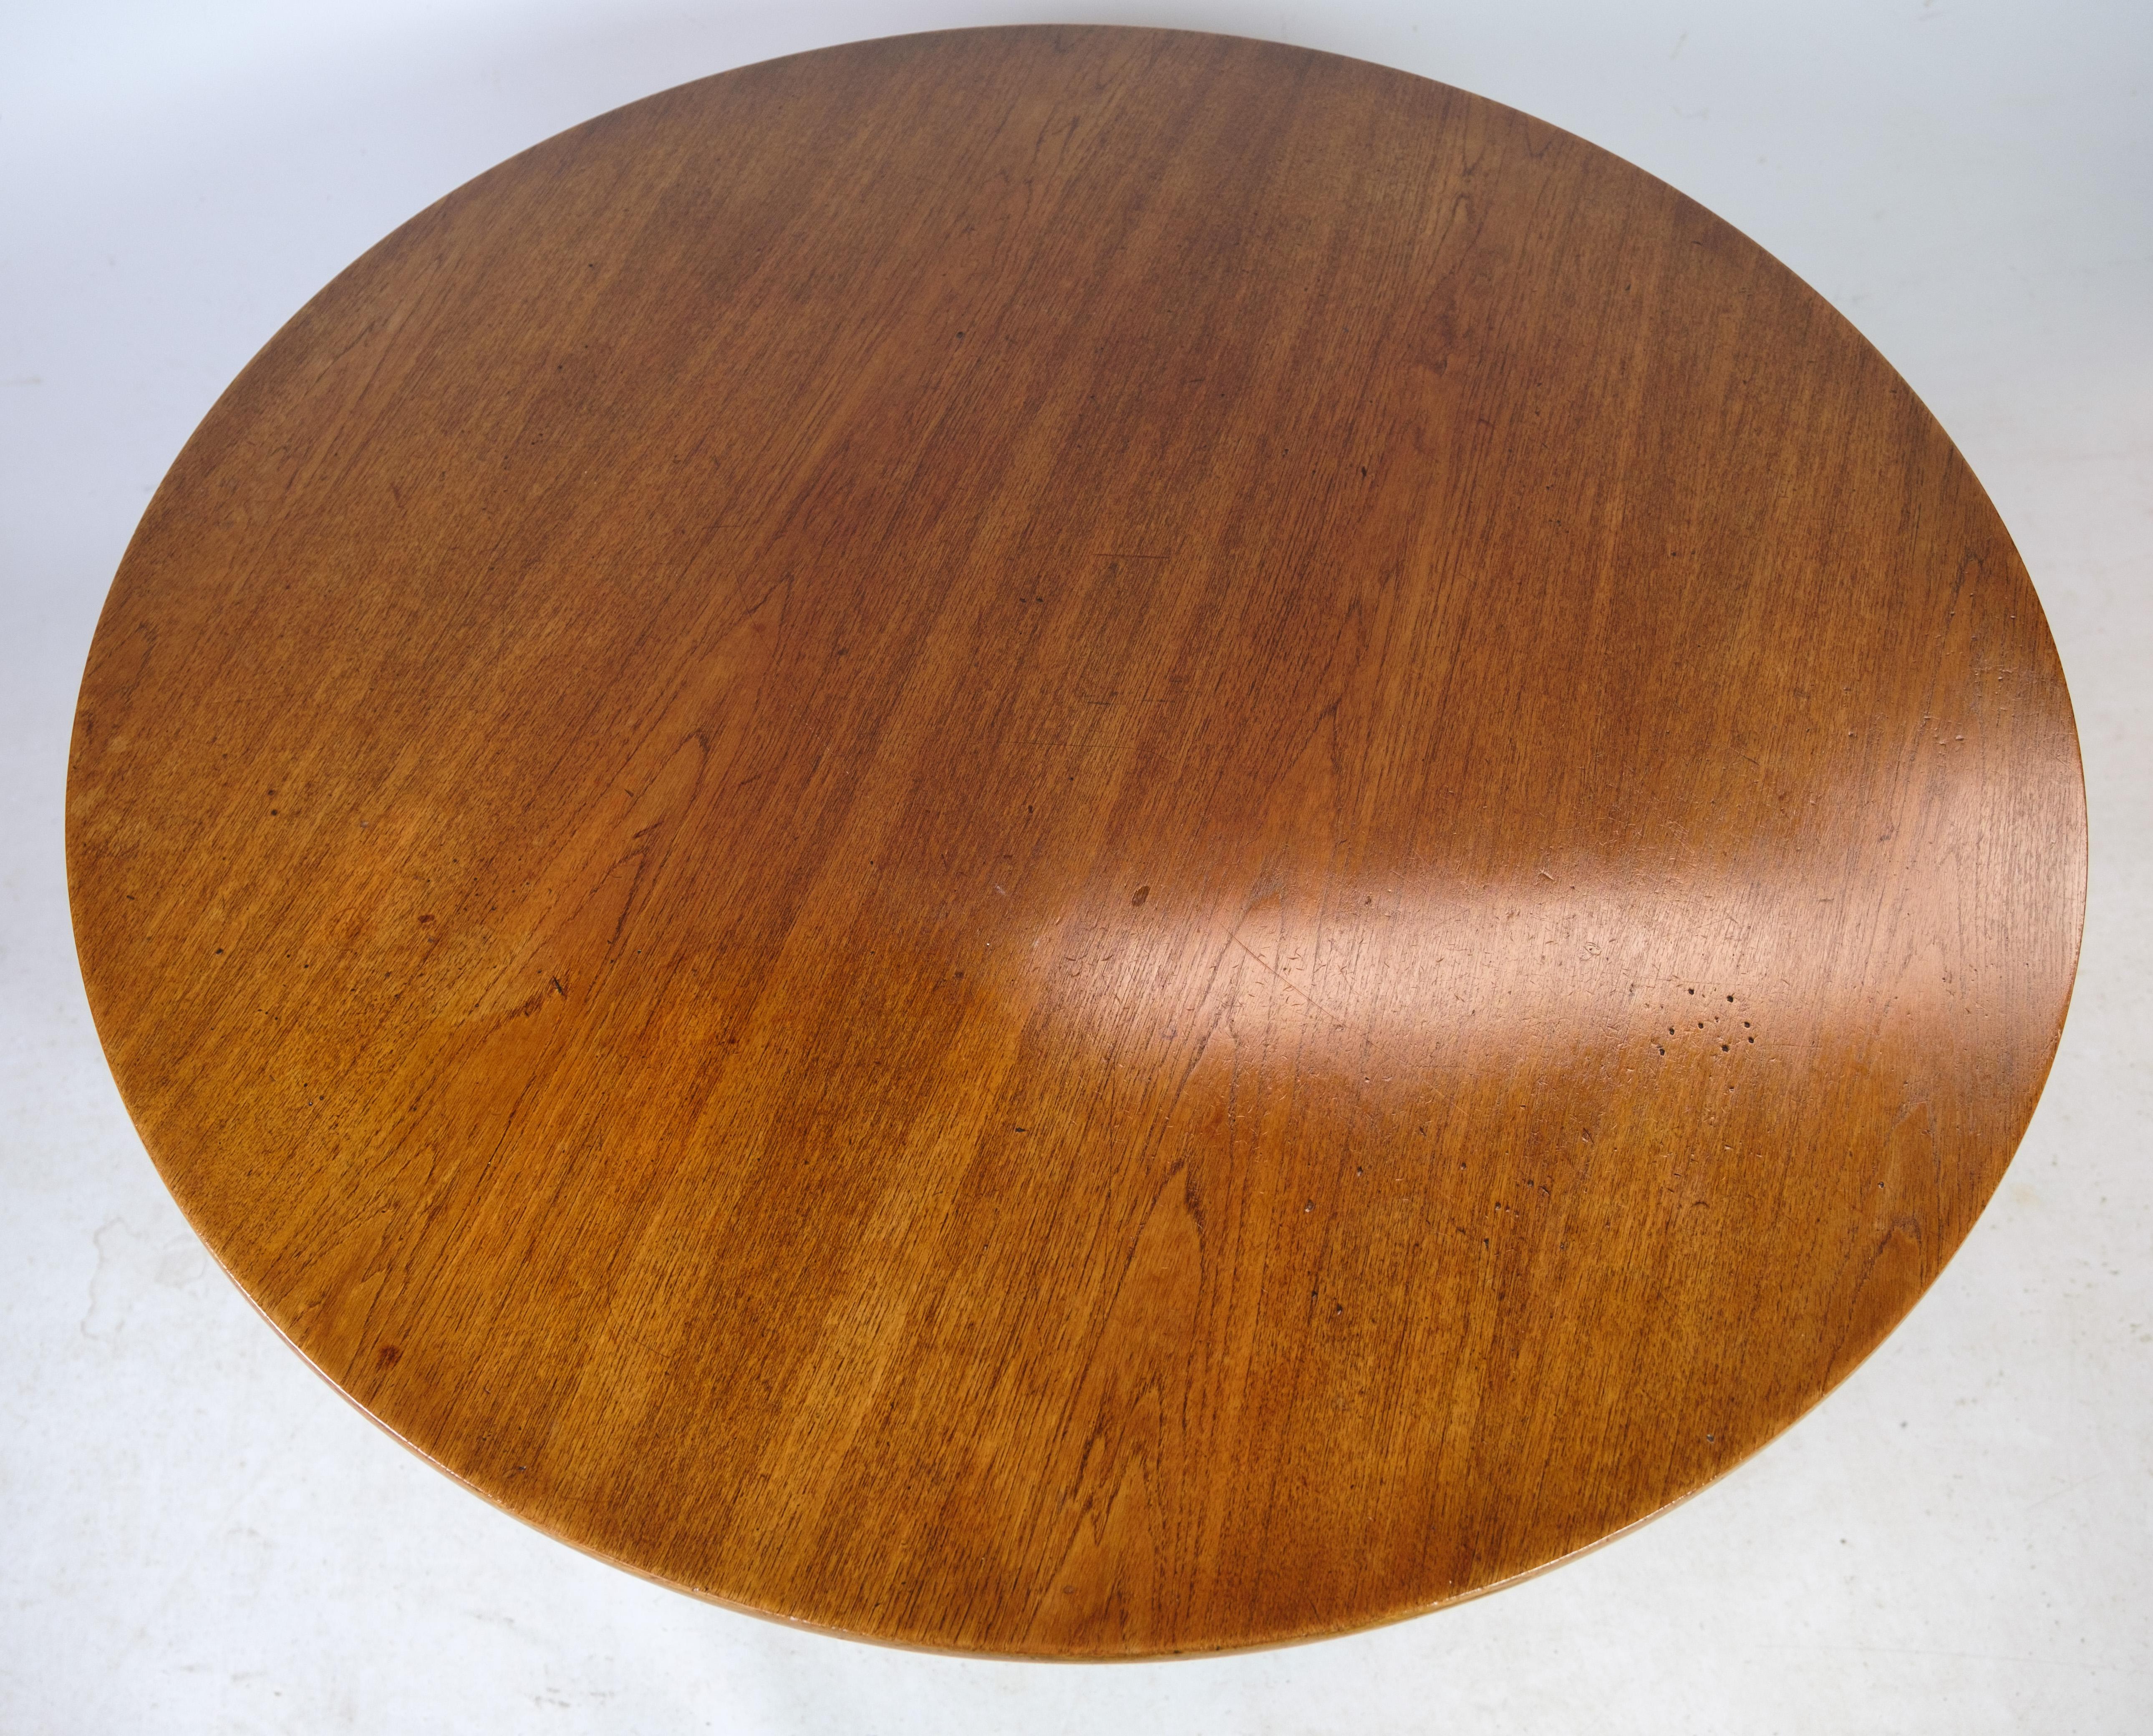 The coffee table in teak and solid oak frame was designed by Hans J. Wegner for Andreas Tuck in the 1950s. This is an early model in its original condition, which adds to its authenticity and value.

The table is a beautiful example of mid-century